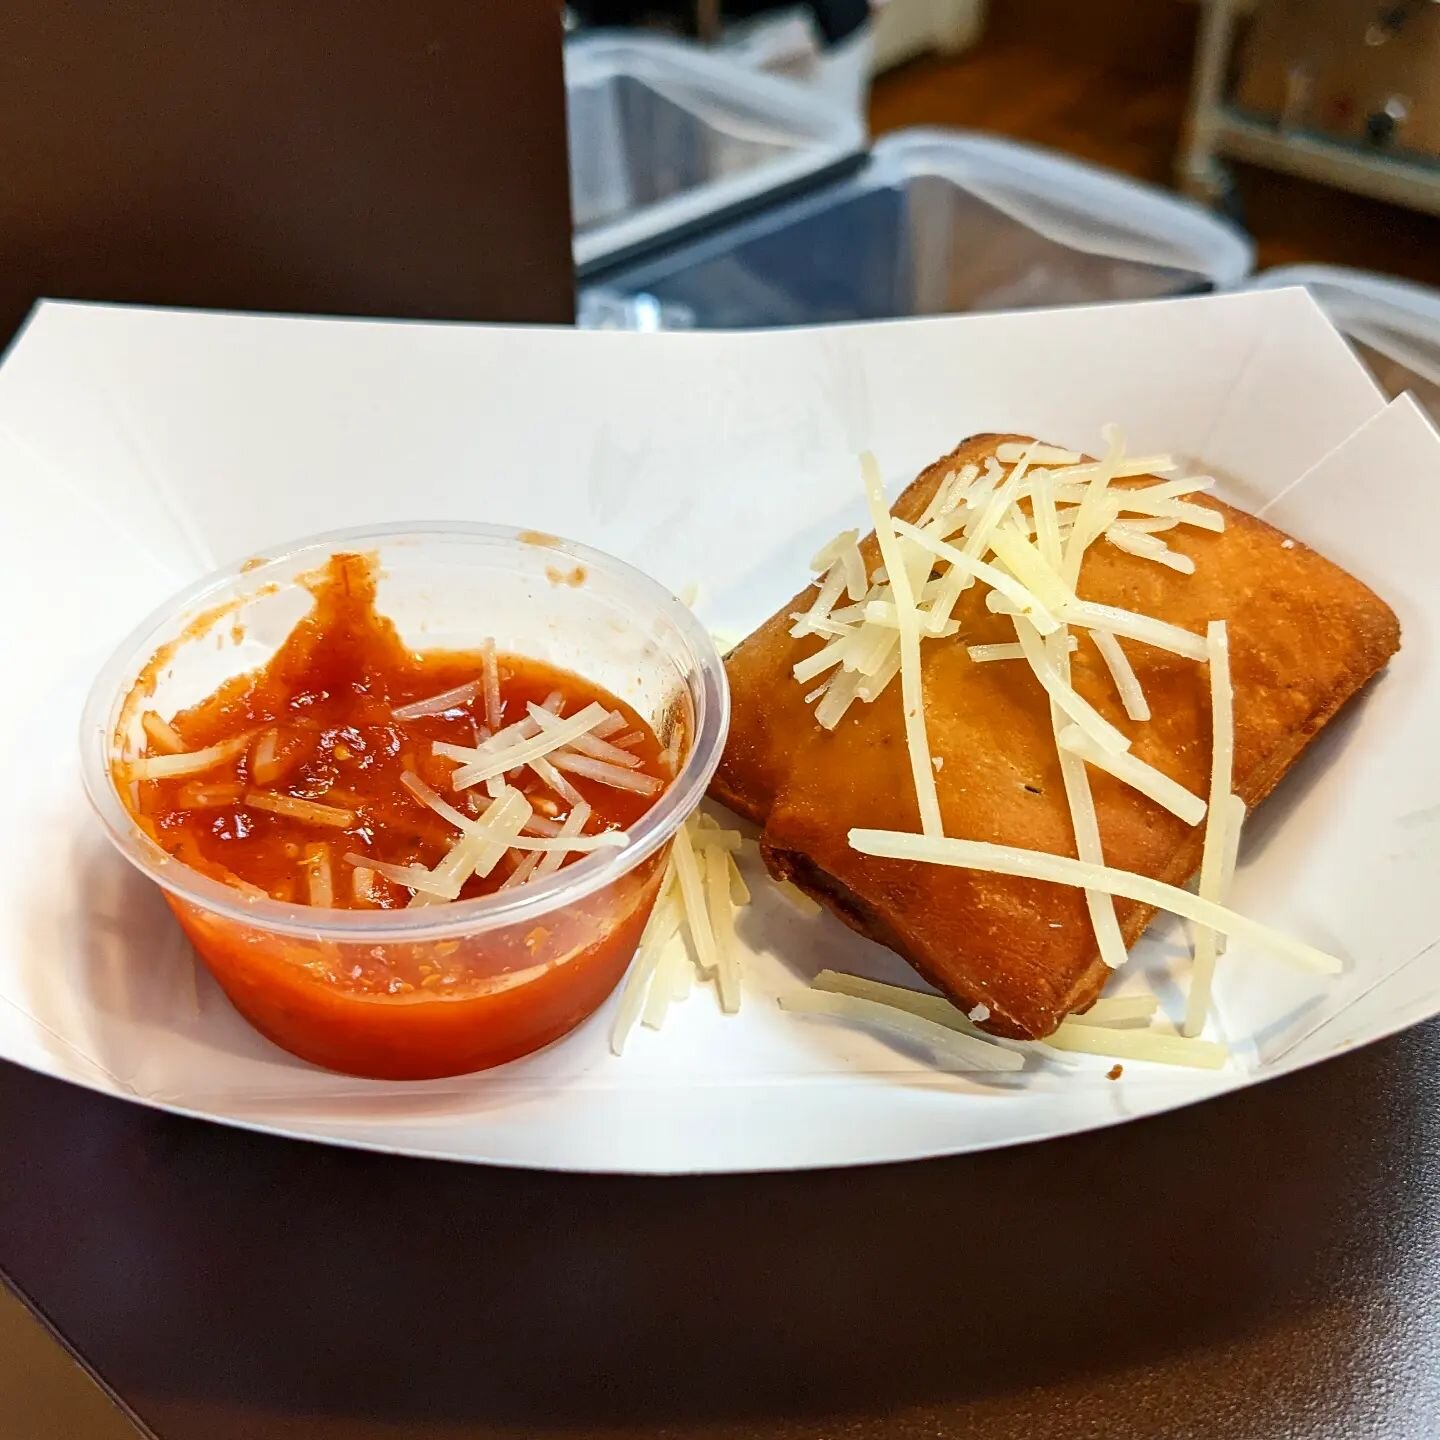 Got to try a new savory beignet from @beignetallday2022  I had just the right amount of spice and it paired perfectly with the marinara sauce.